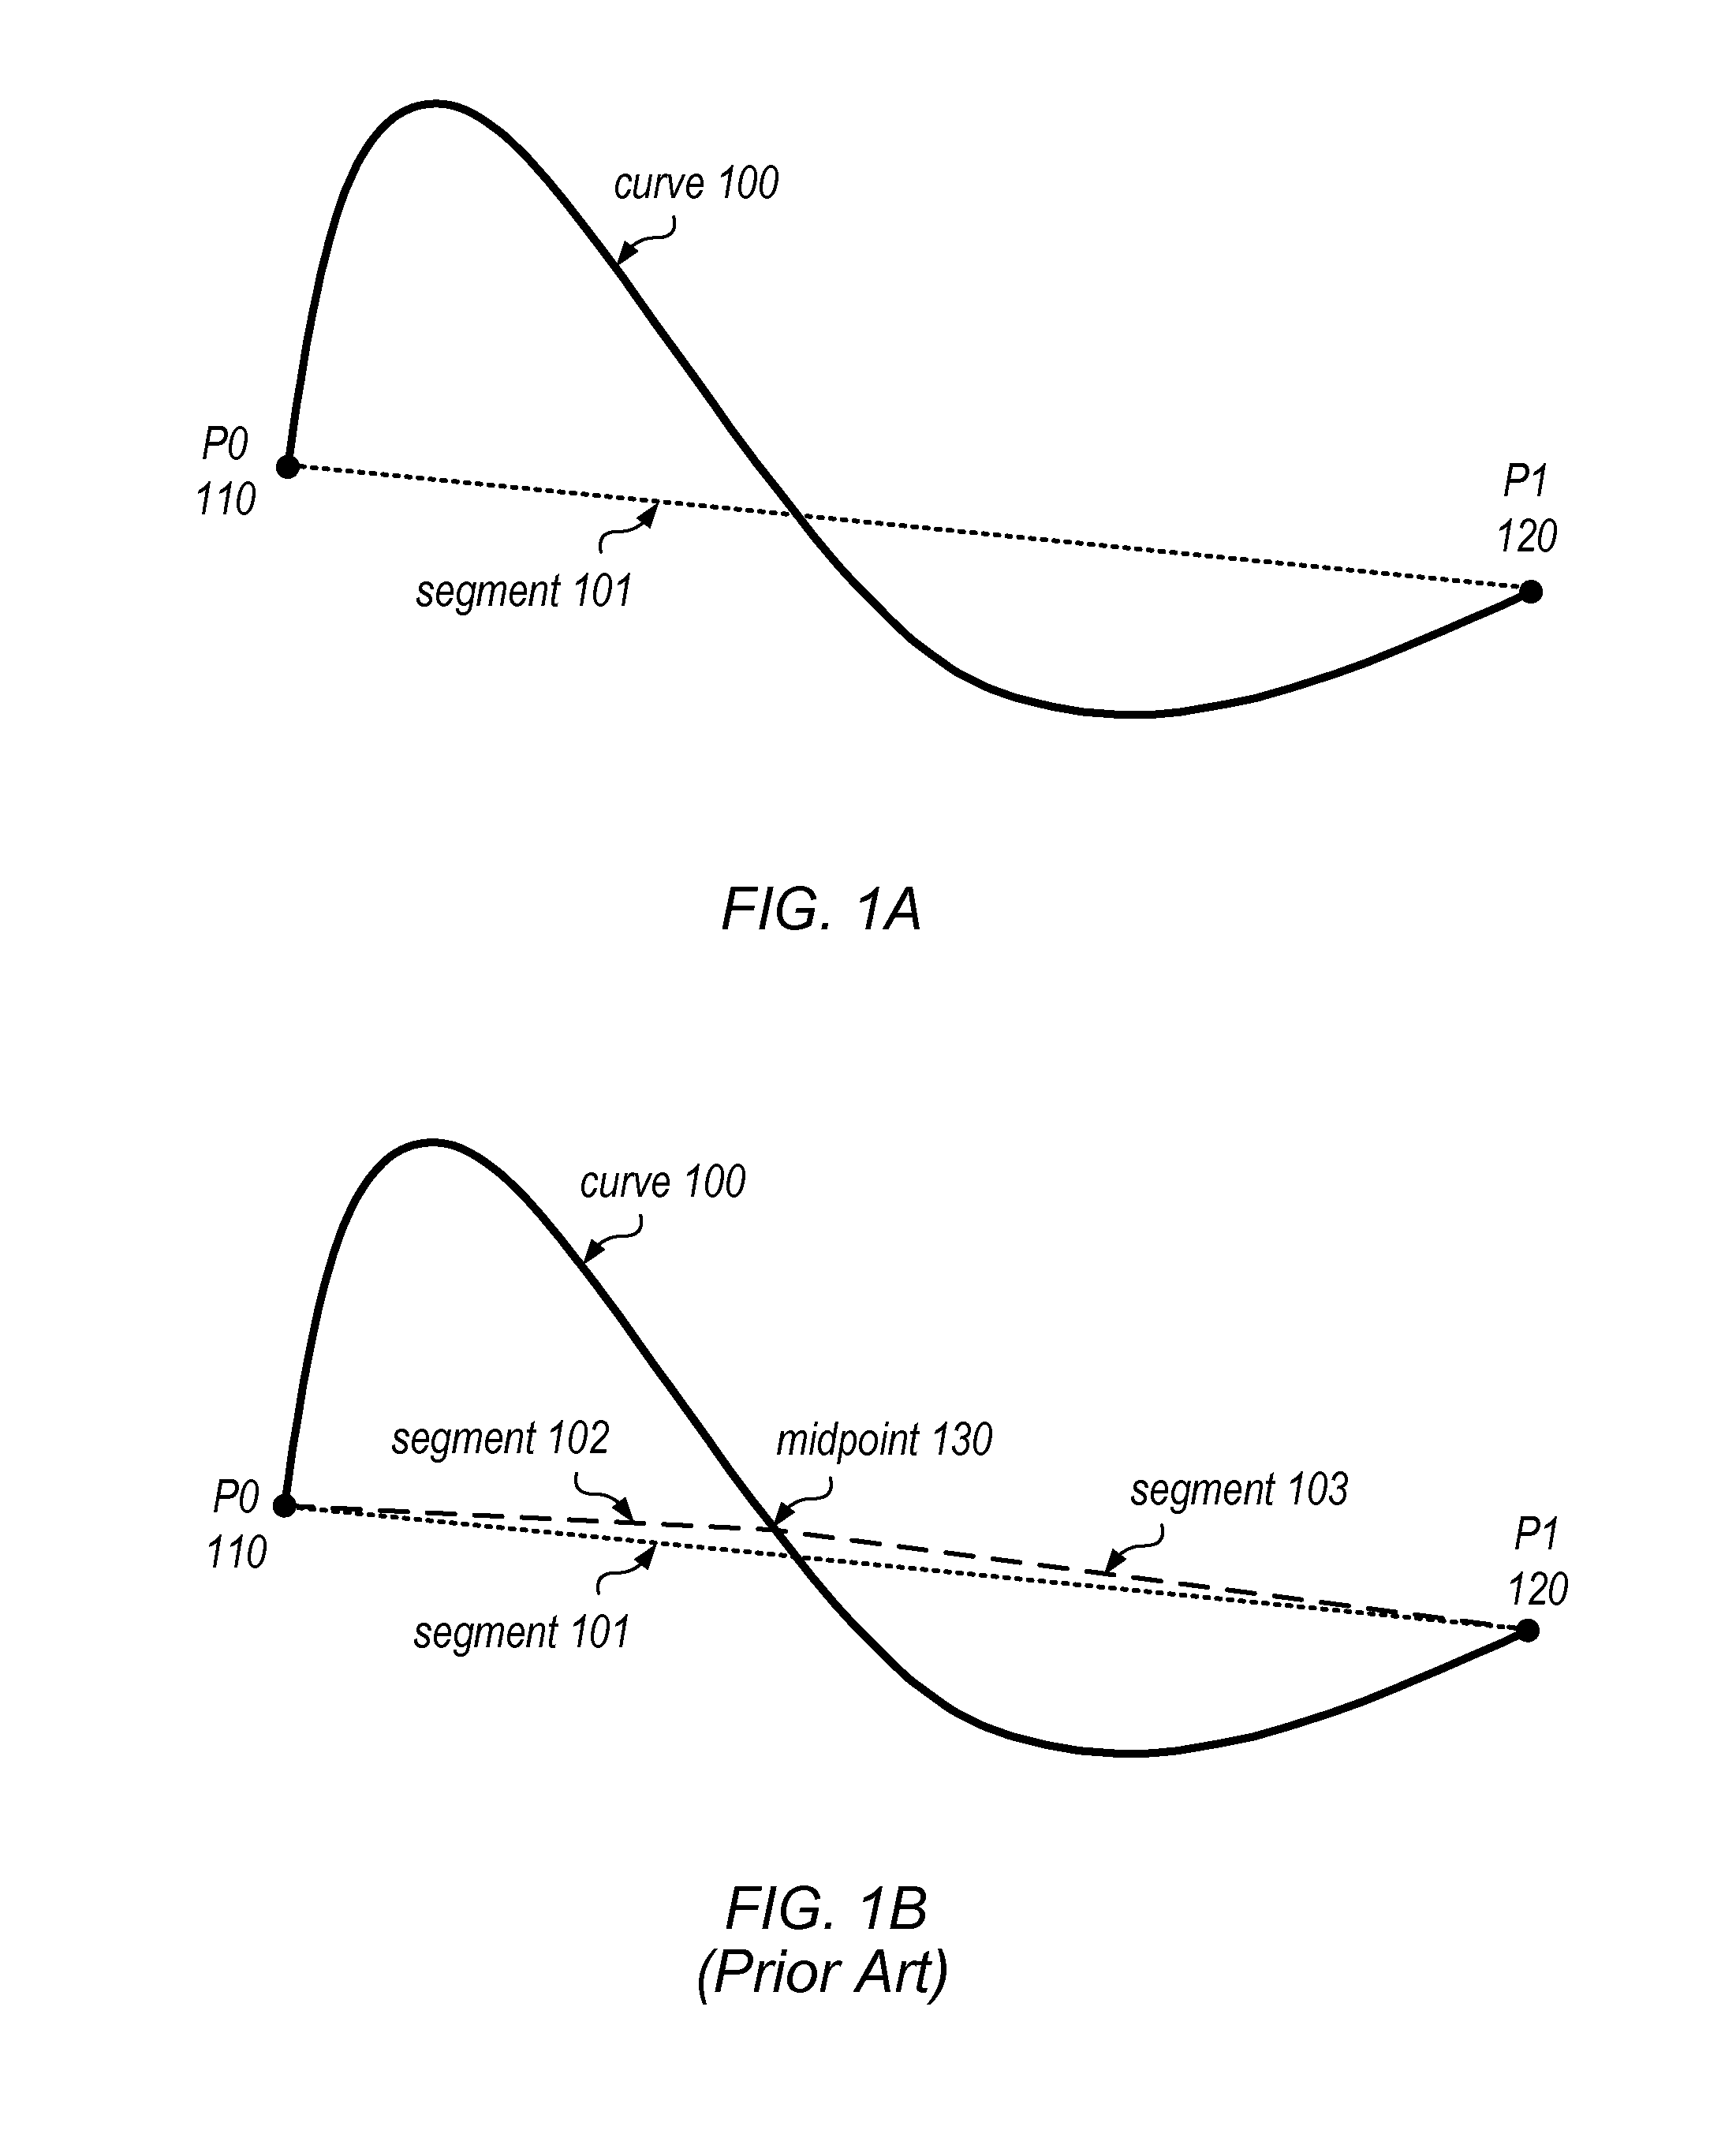 System and method for approximating parametric curves using optimal number of segments